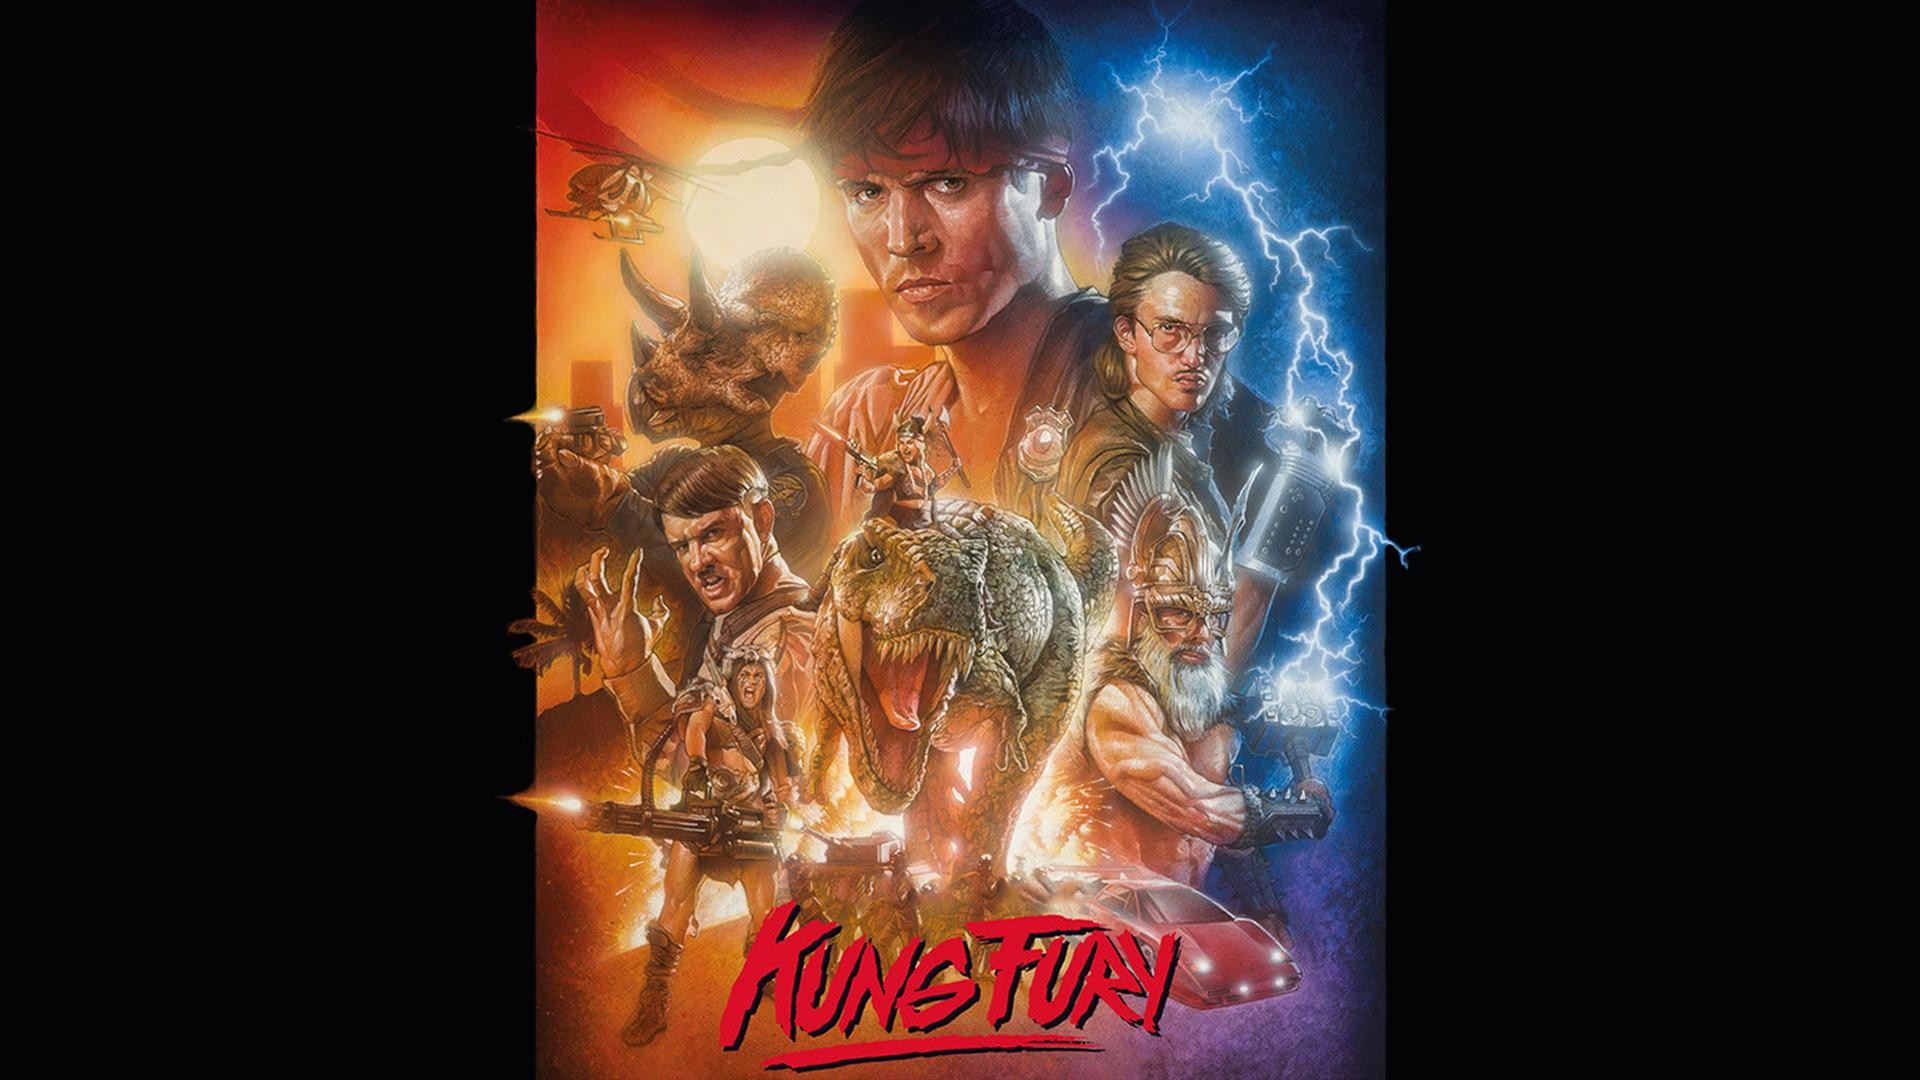 1920x1080 I made a wallpaper from the official "Kung Fury" Poster [] :  wallpapers